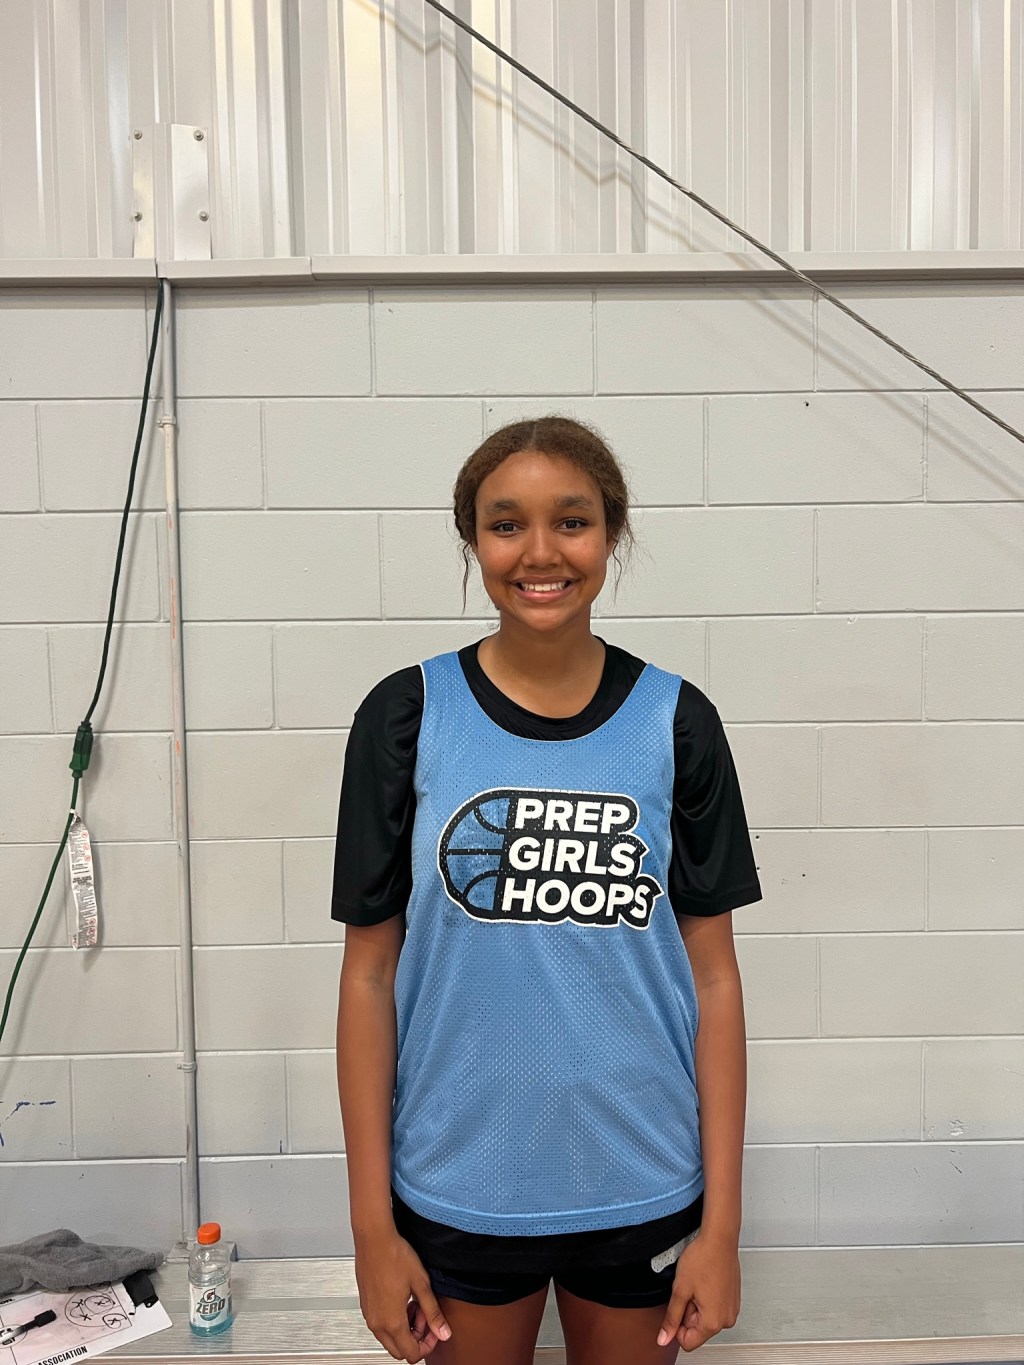 Top Forwards who stood out at the Freshman Showcase